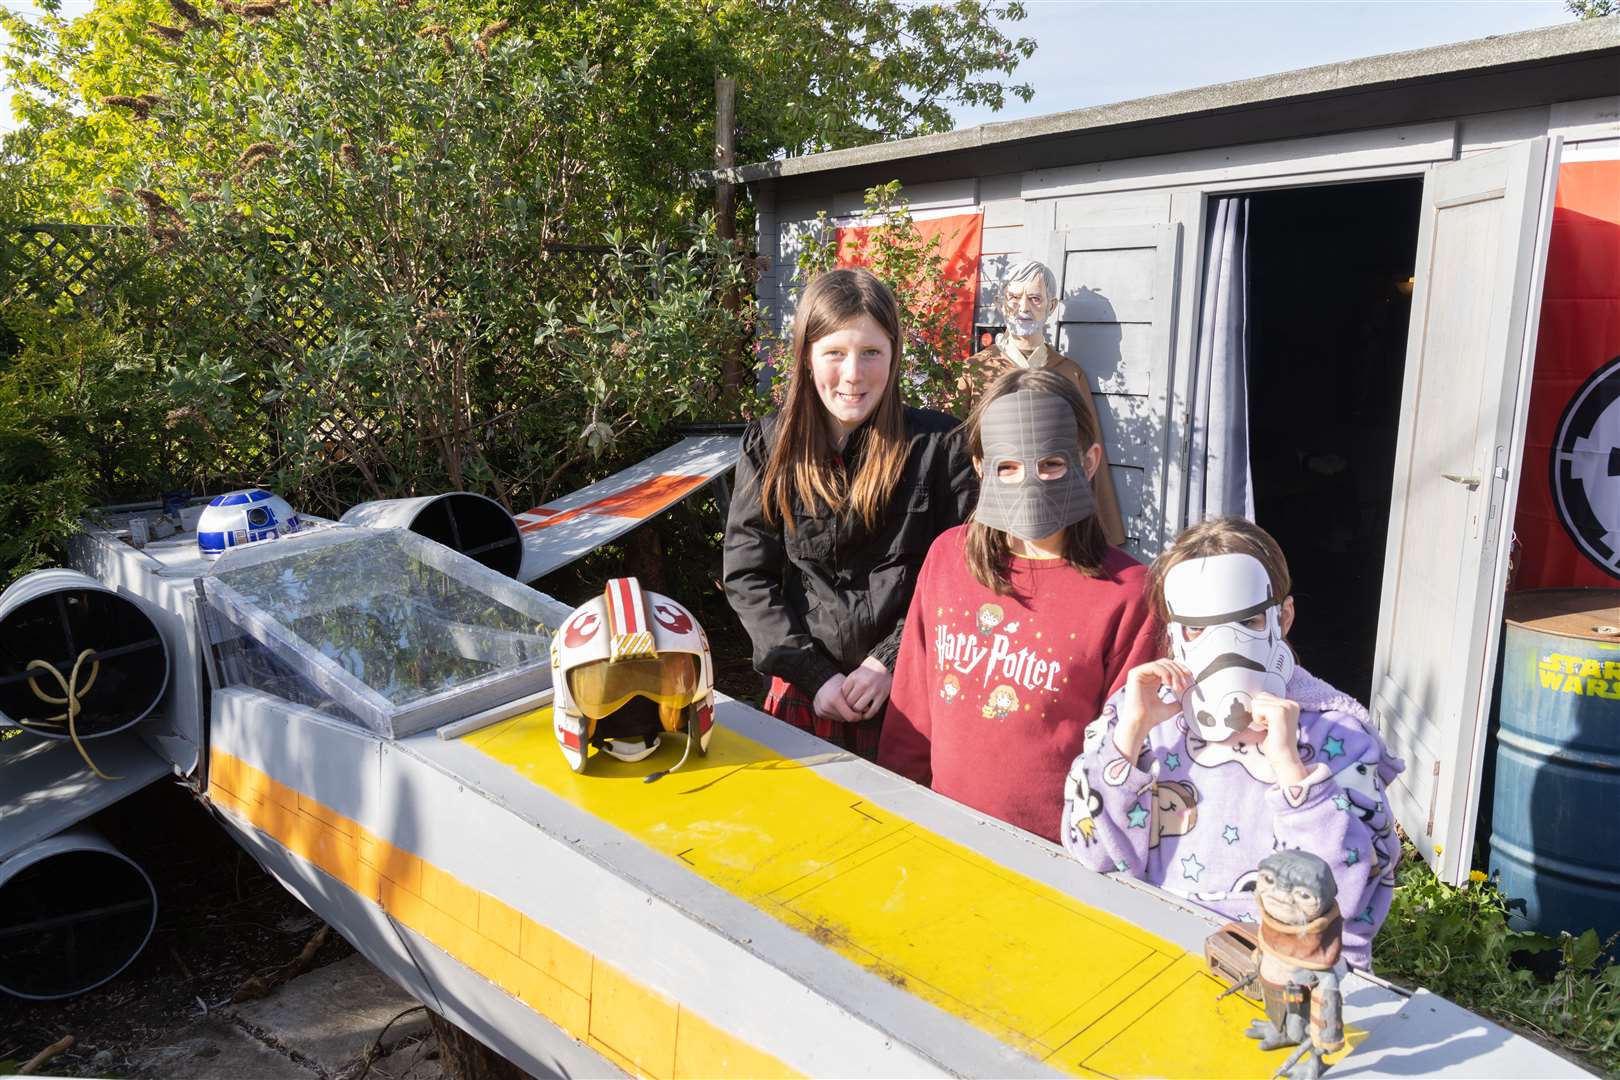 Caitlin Riddell, Sofia Haytack and Maisie Haytack checking out the X-wing Starfighter.